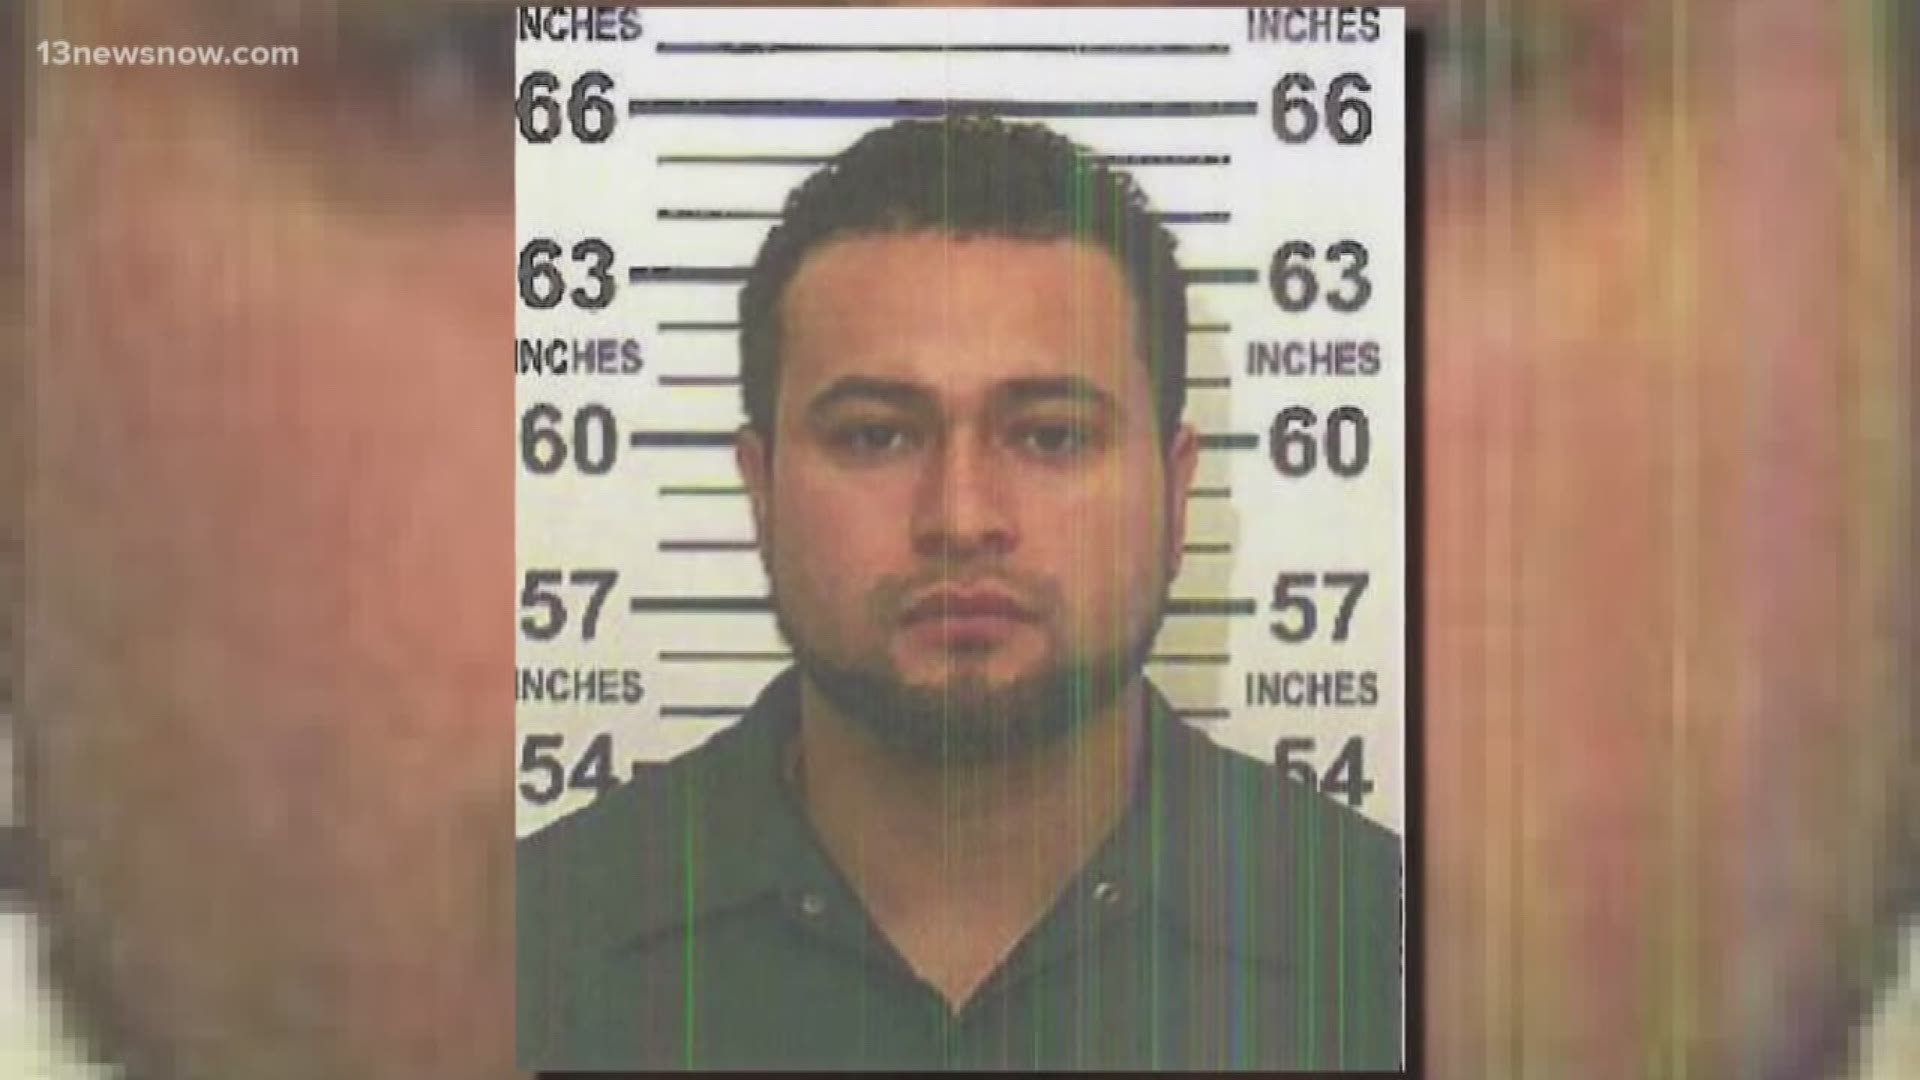 Officers said 33-year-old Melvin Alonso Sandoval-Martinez is accused of raping a woman. There are felony warrants on file for Rape and Object Sexual Penetration.